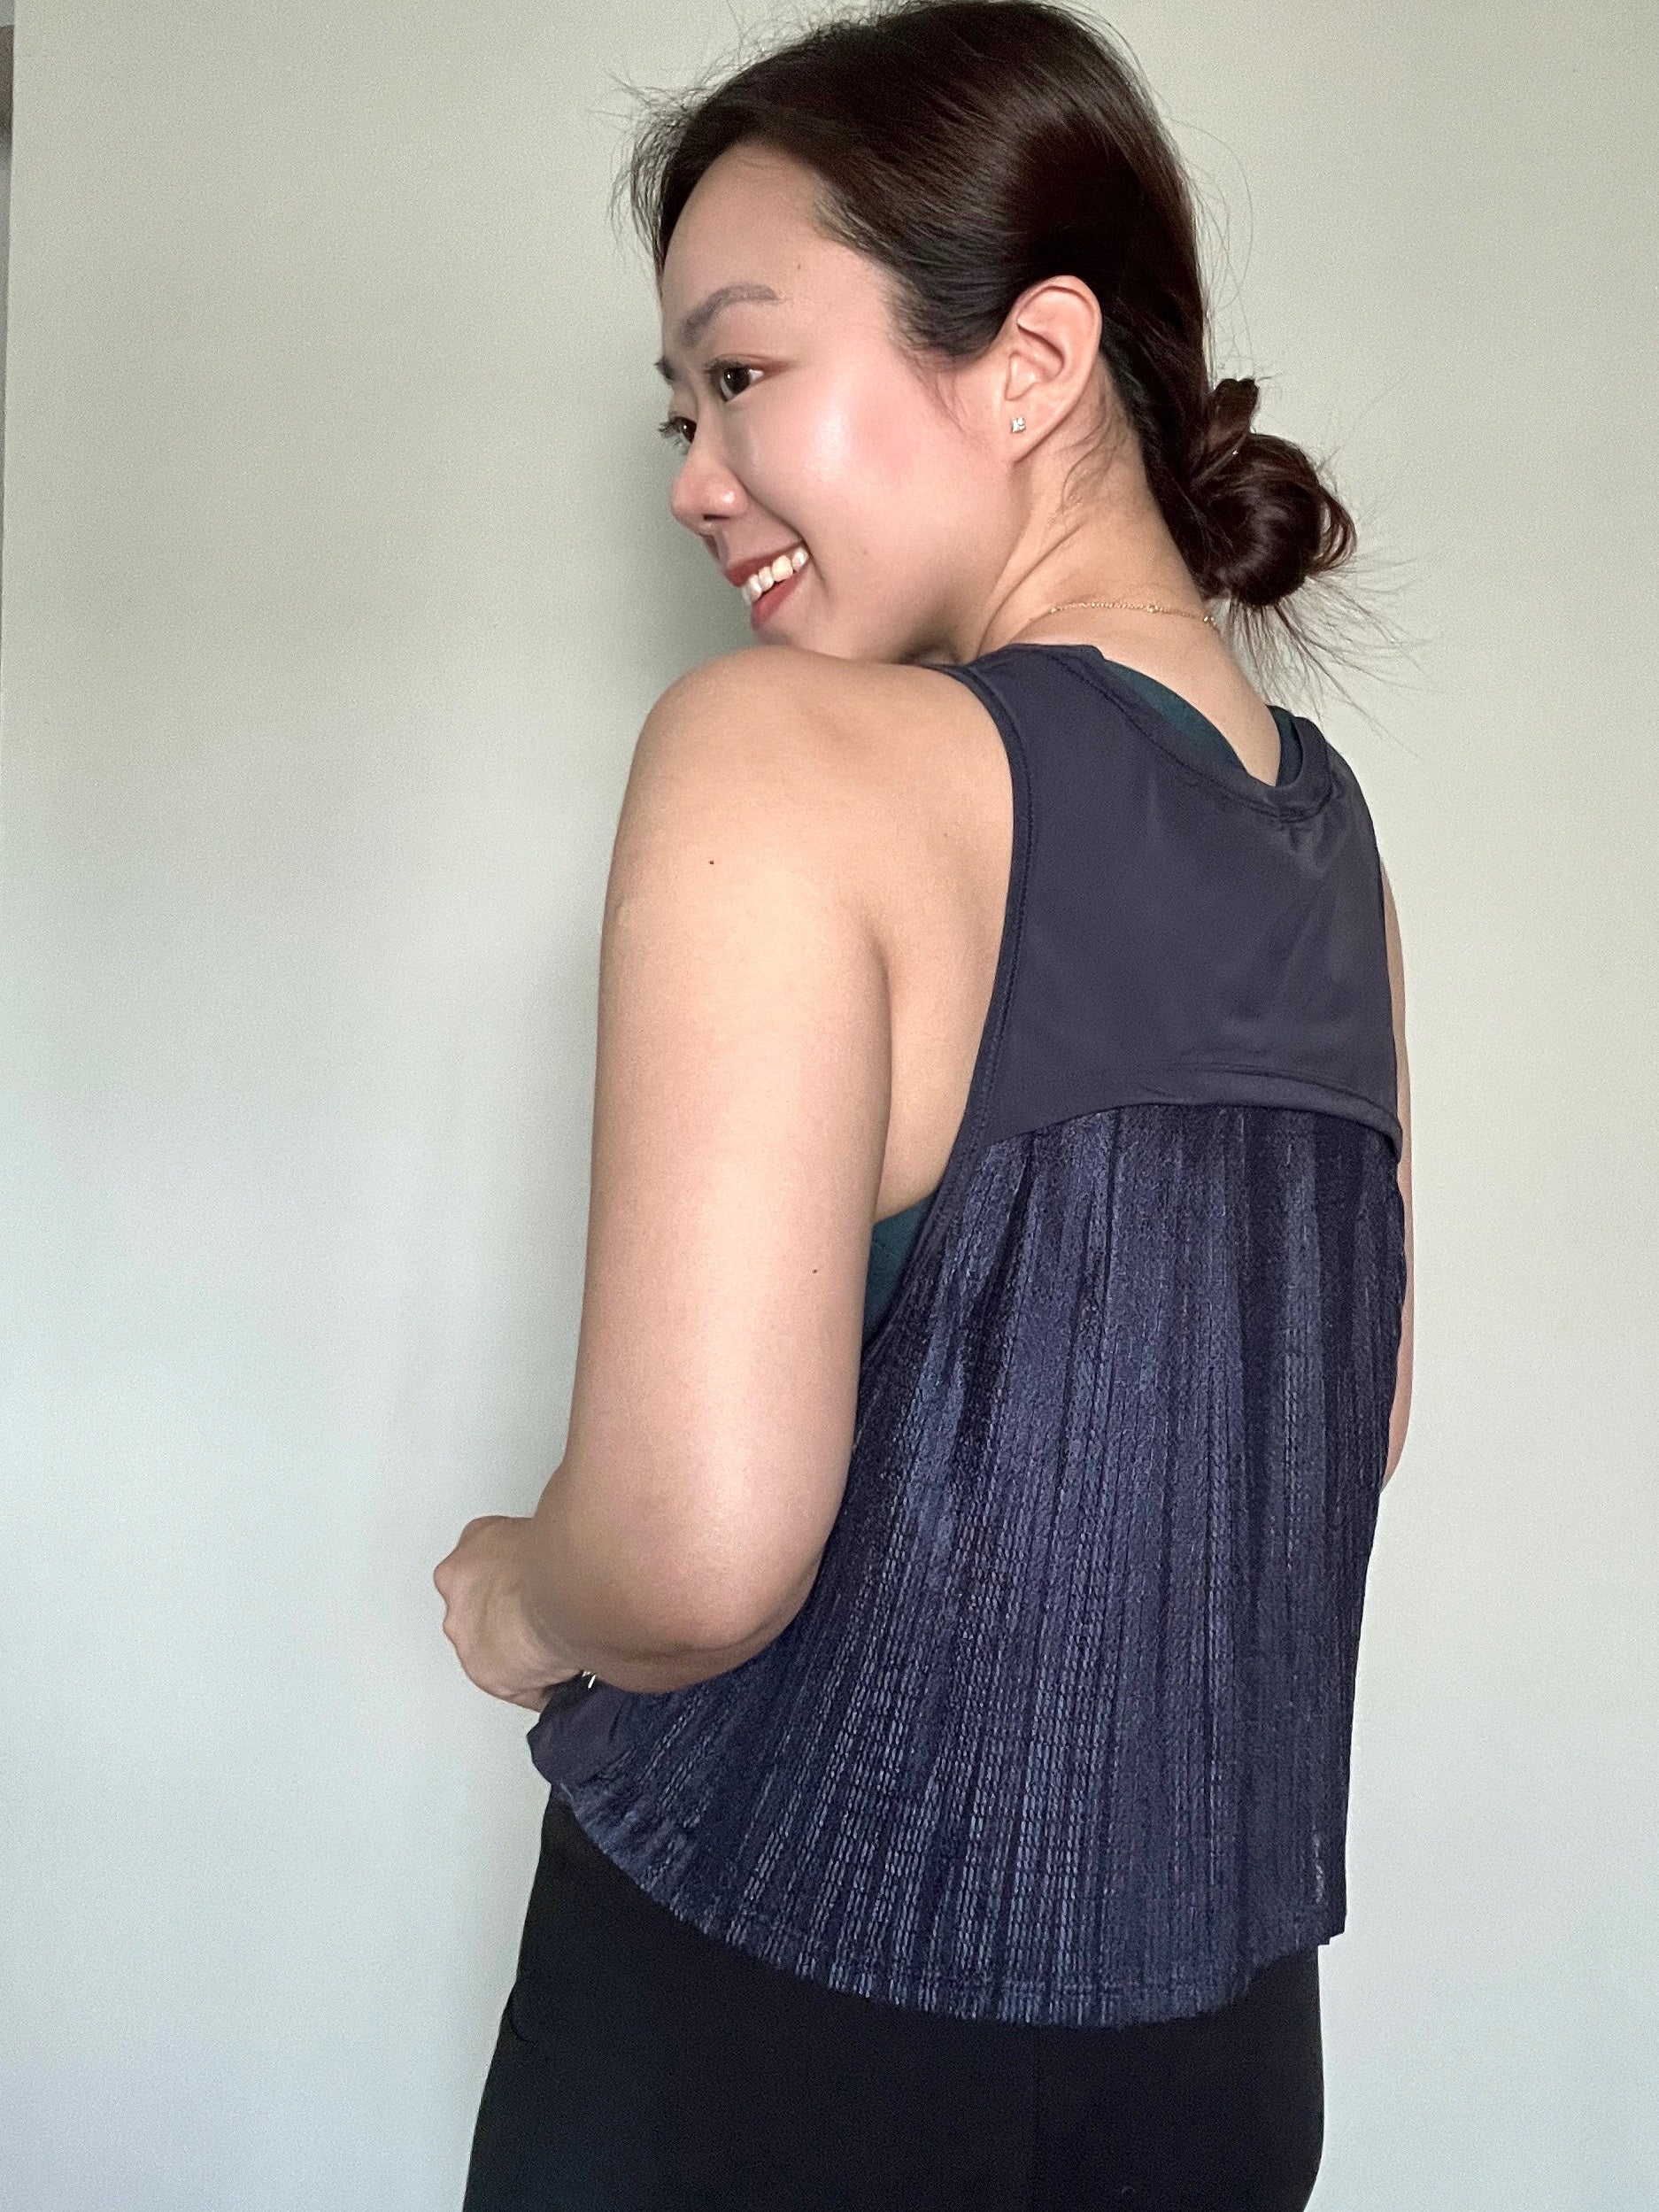 Pleated Tank Top in Navy